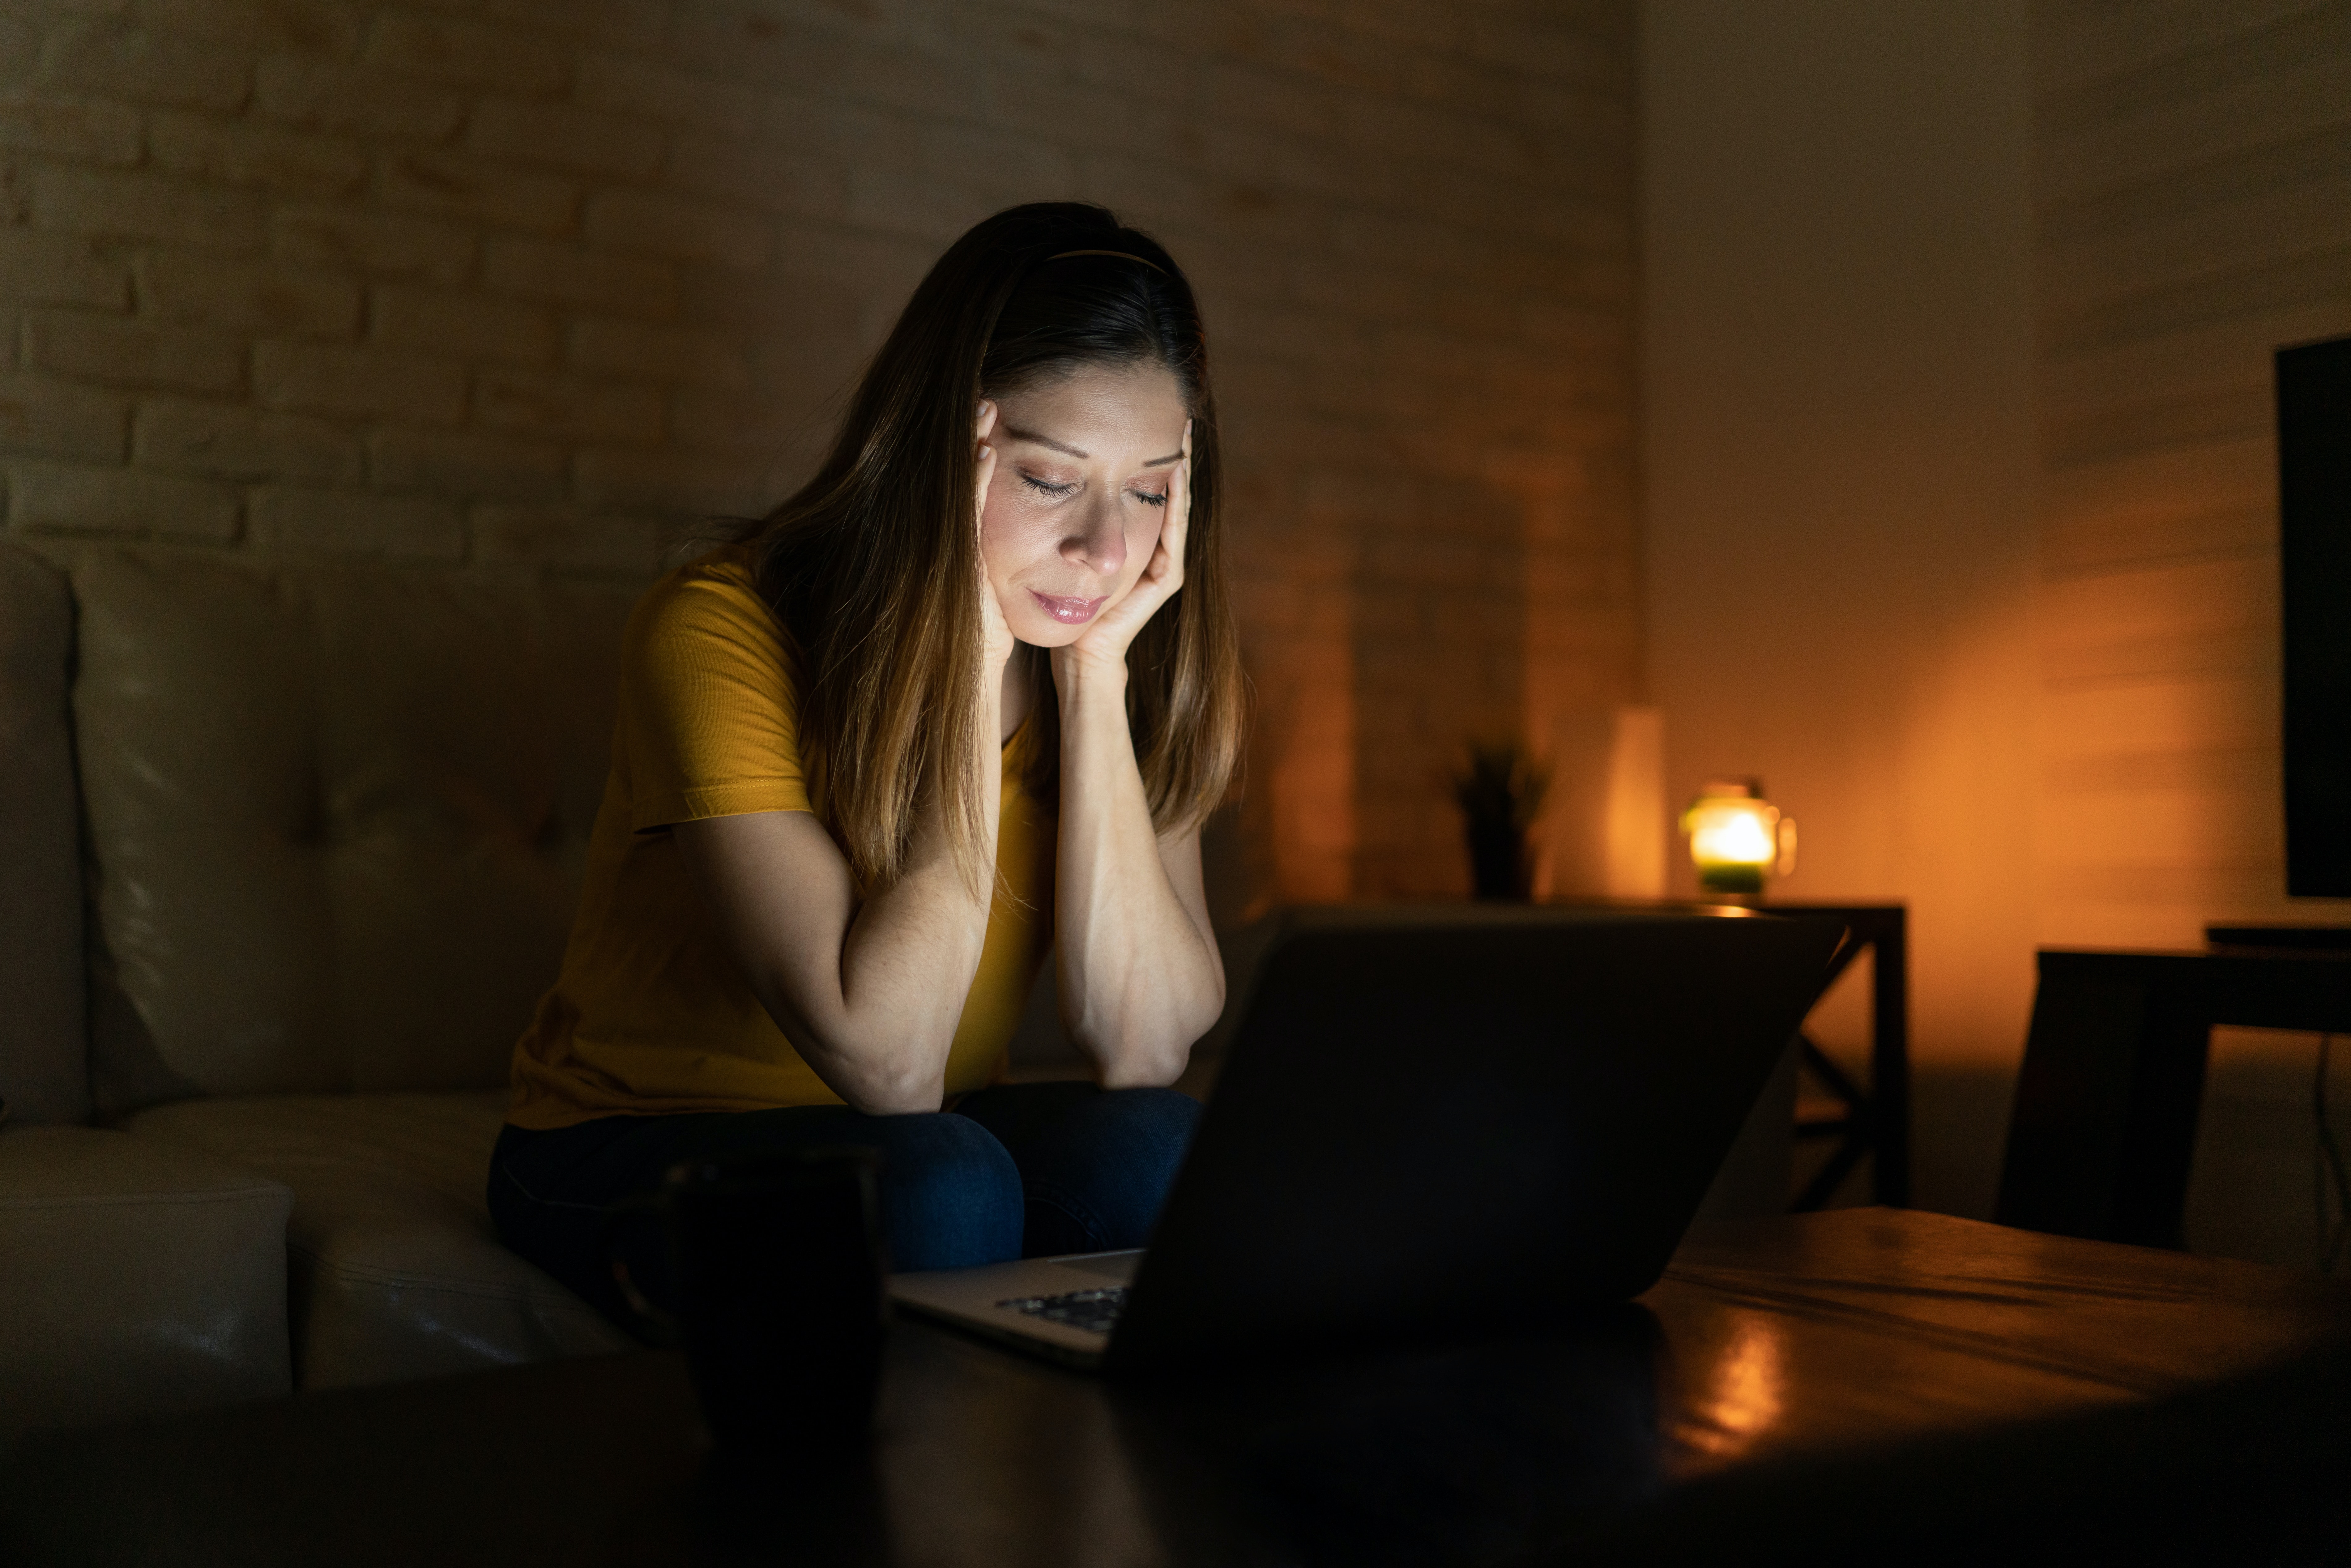  woman feeling overwhelmed at night while working on a laptop computer